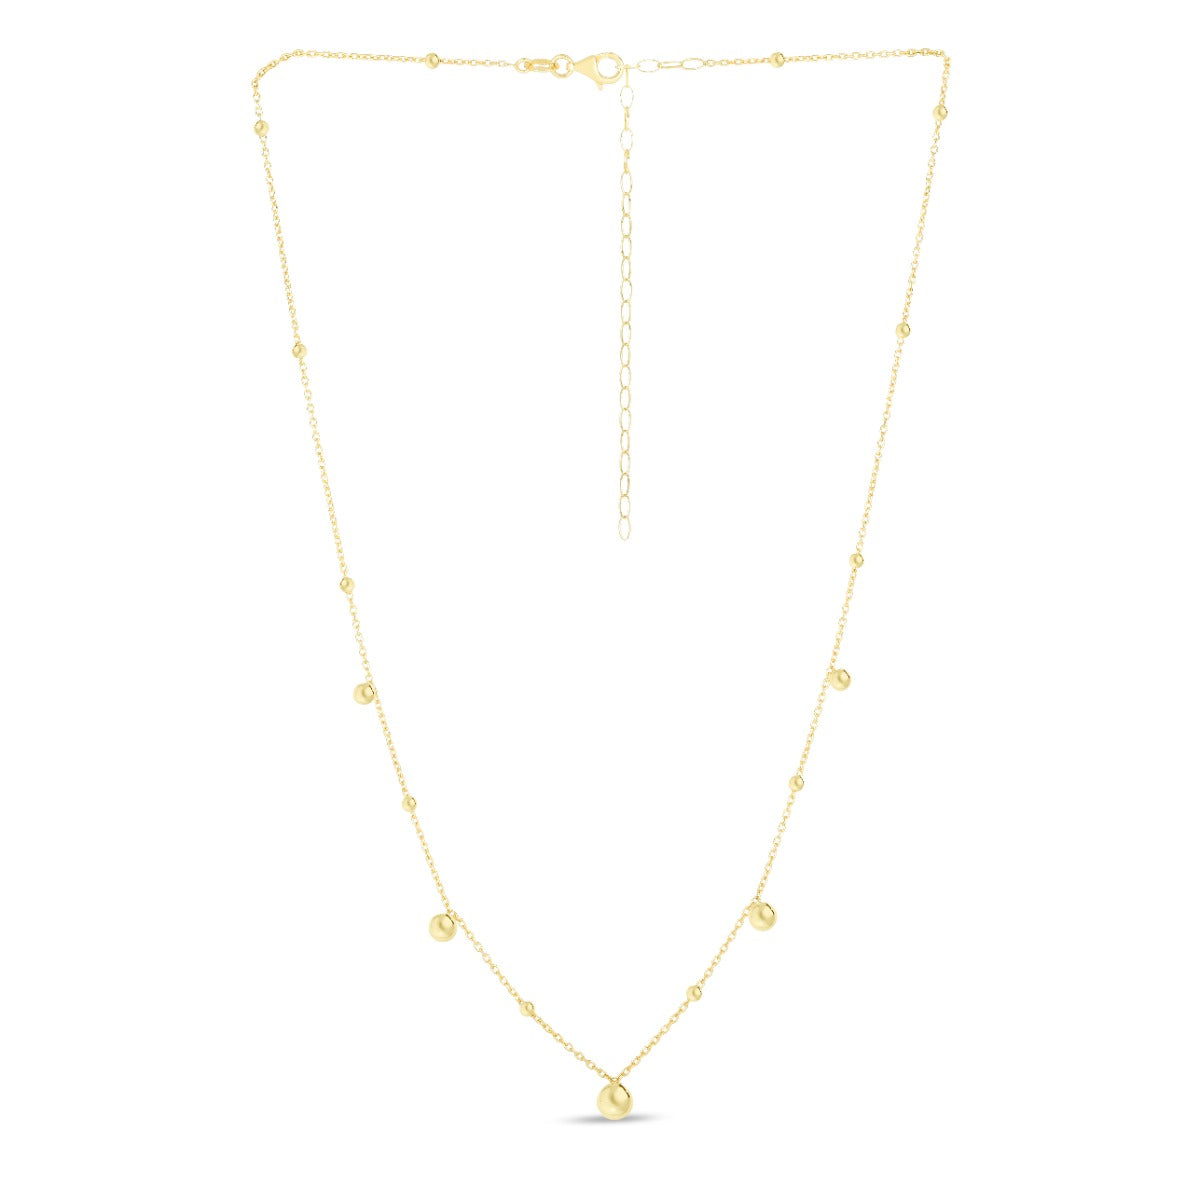 14K Gold Polished Bead Stations Necklace with Lobster Clasp